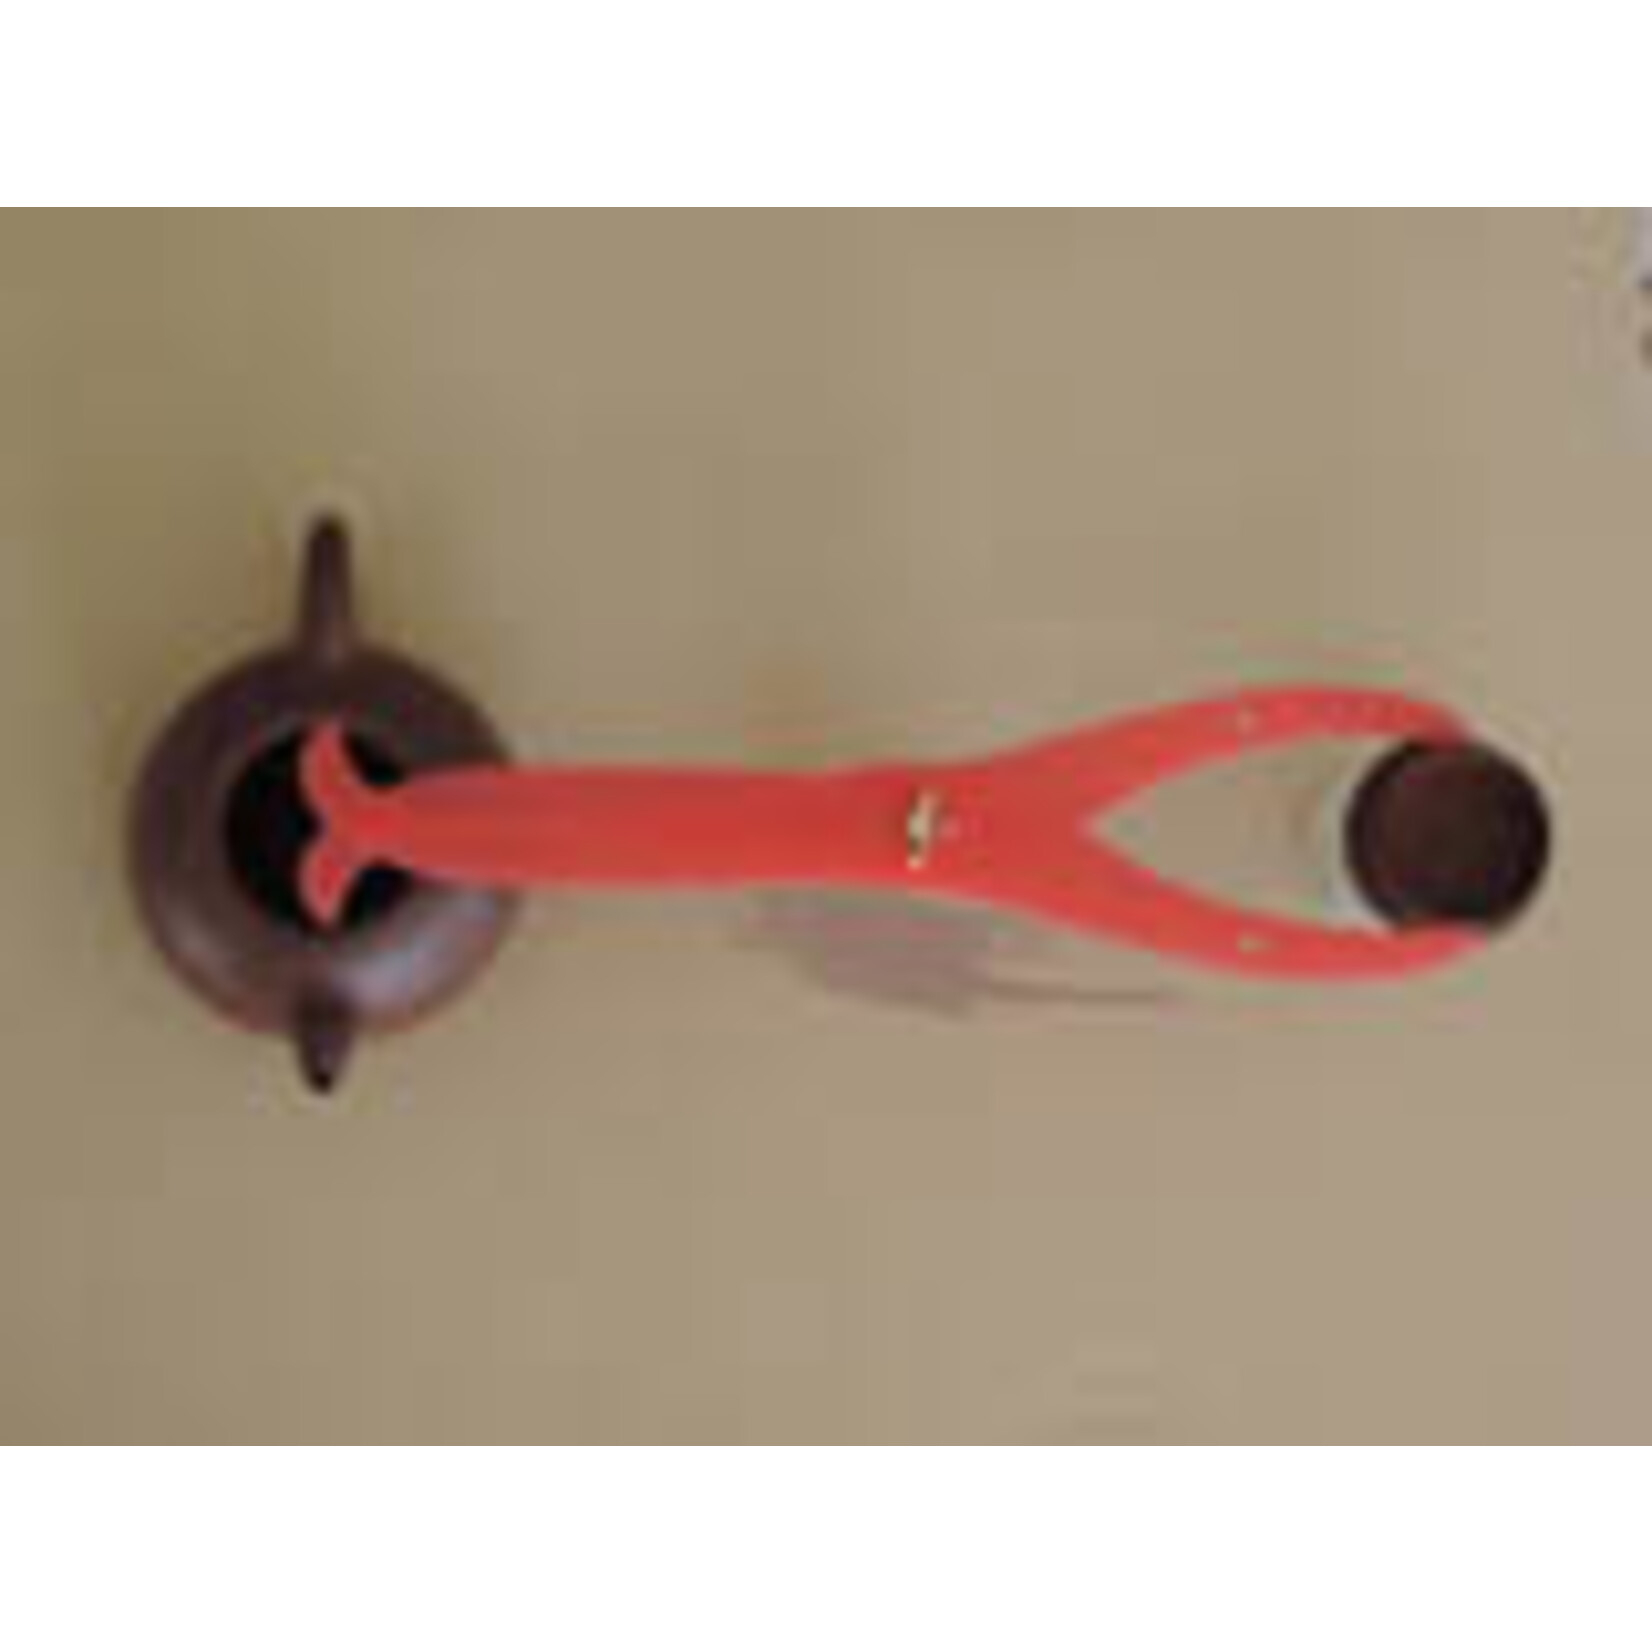 Chinese Clay Art DOUBLE SIDED RED CALIPER 12